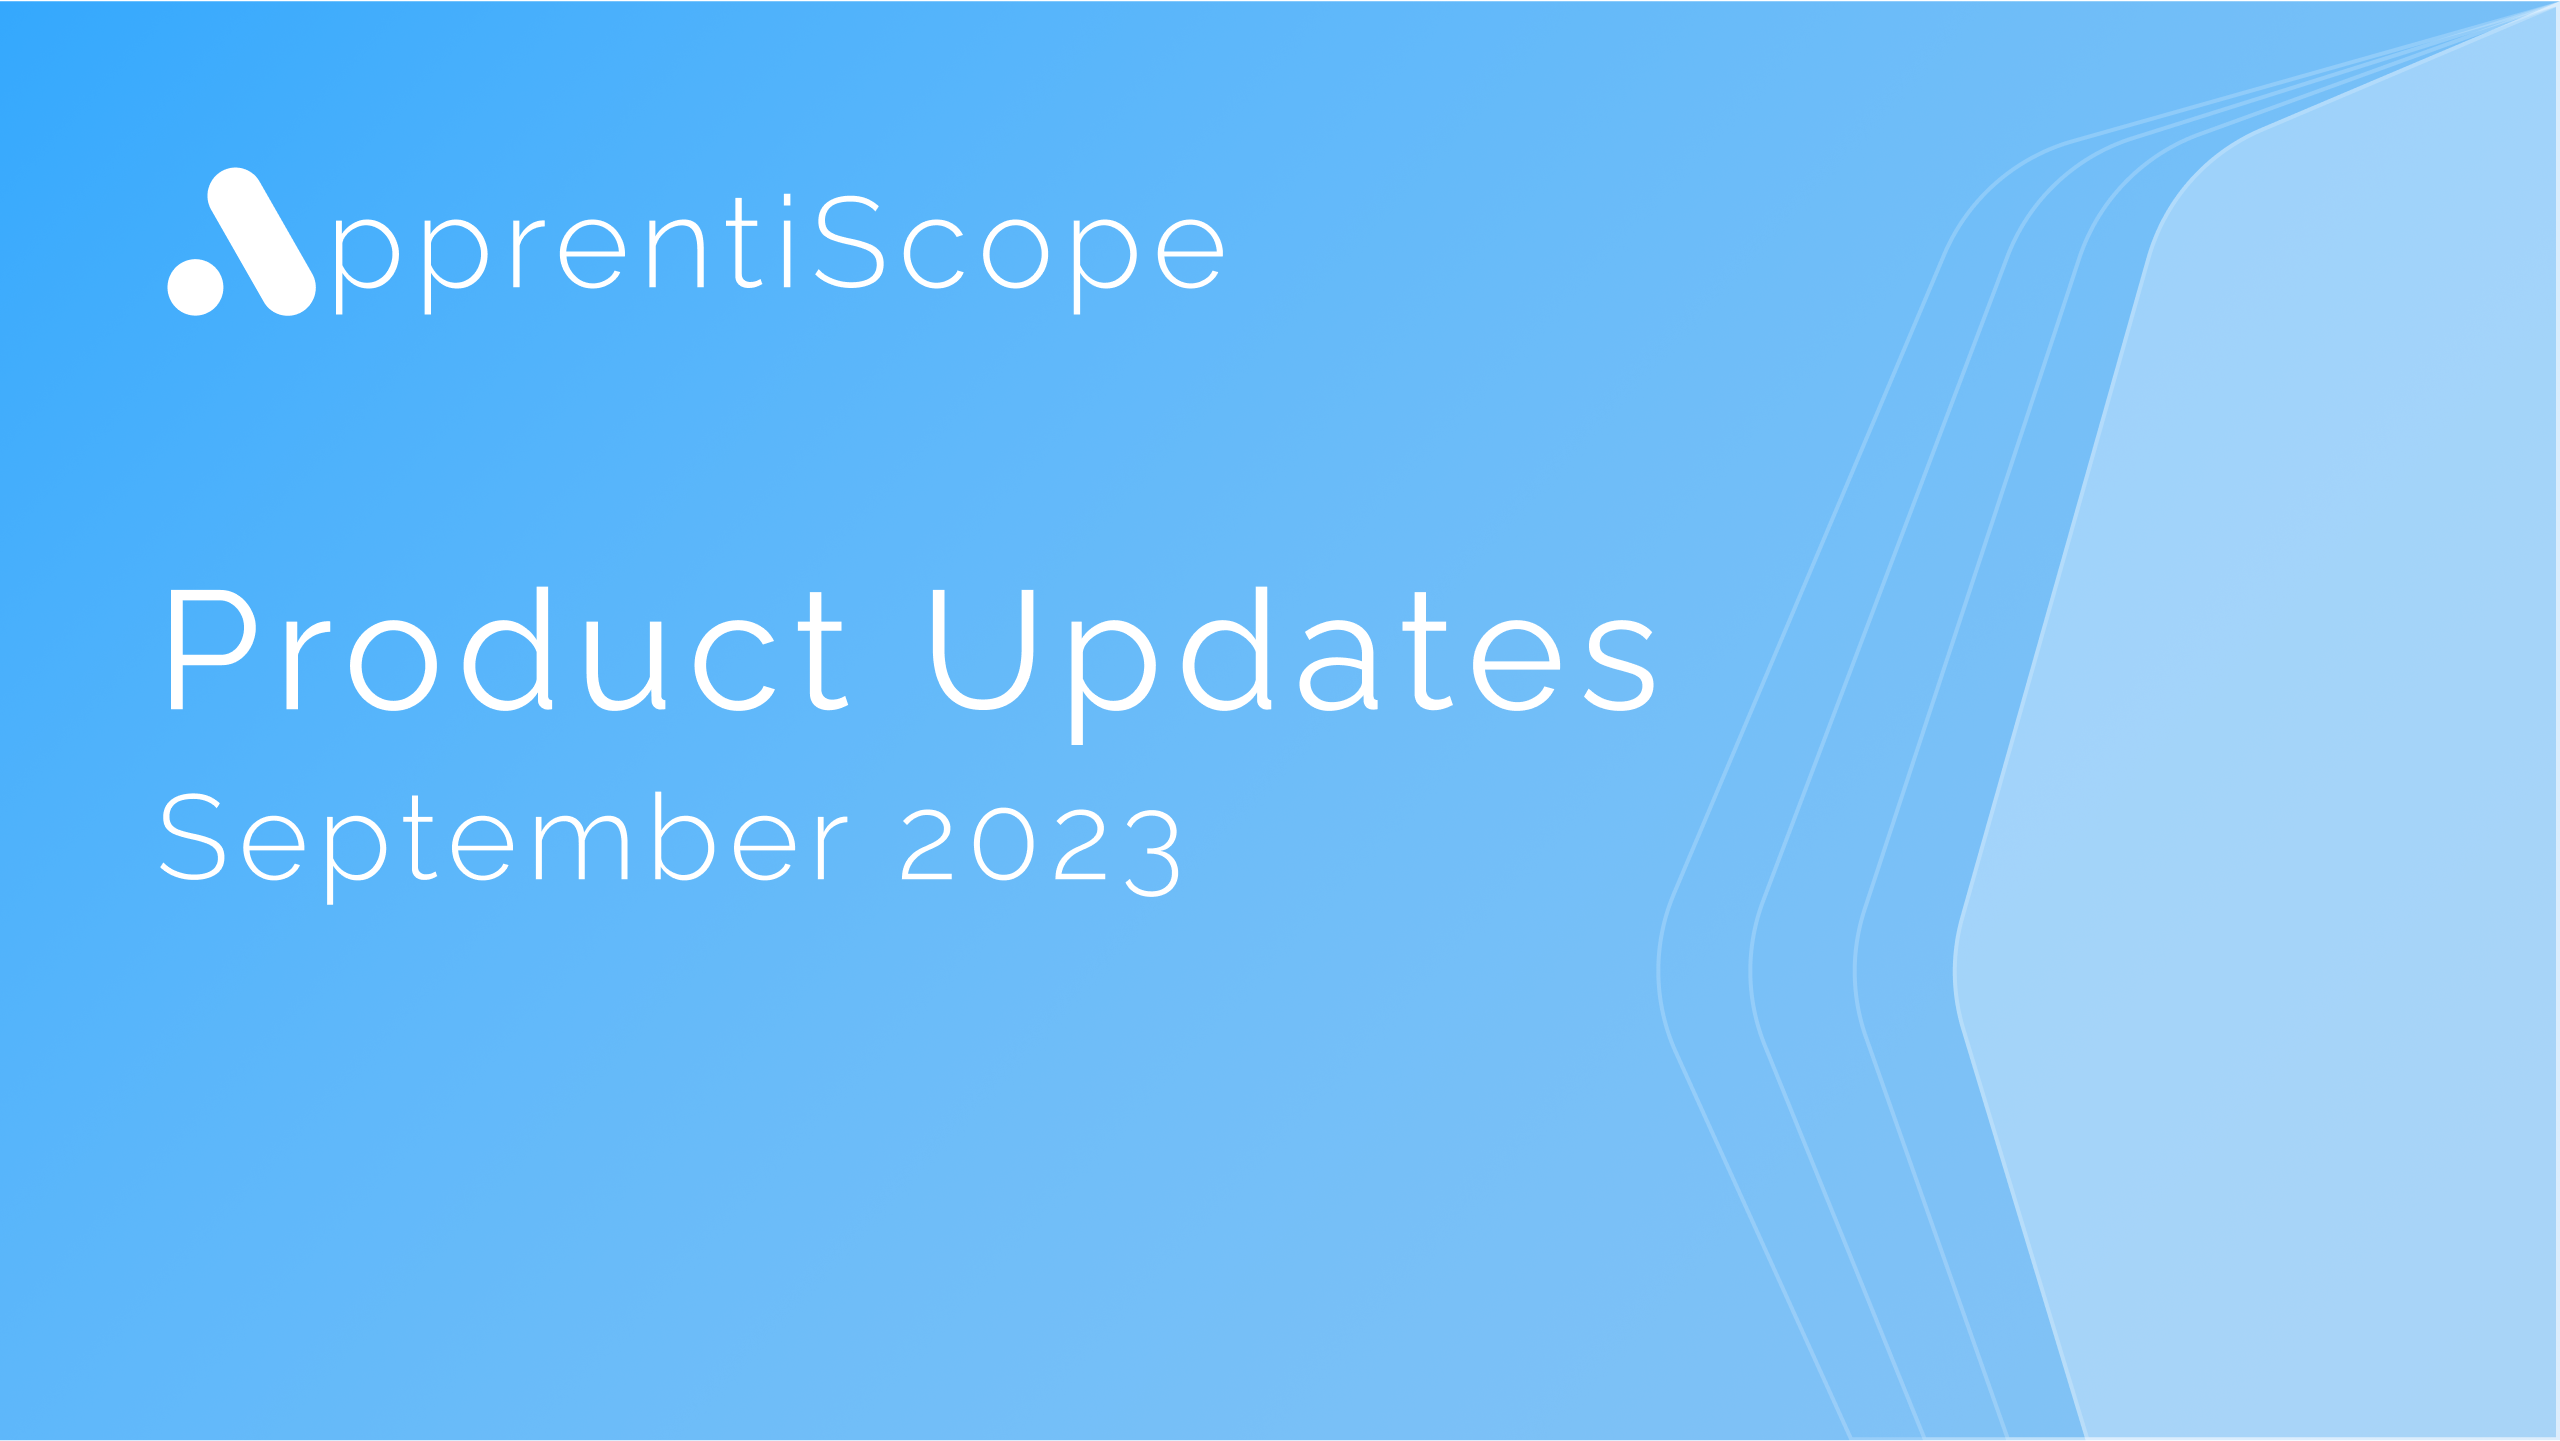 September Product Updates